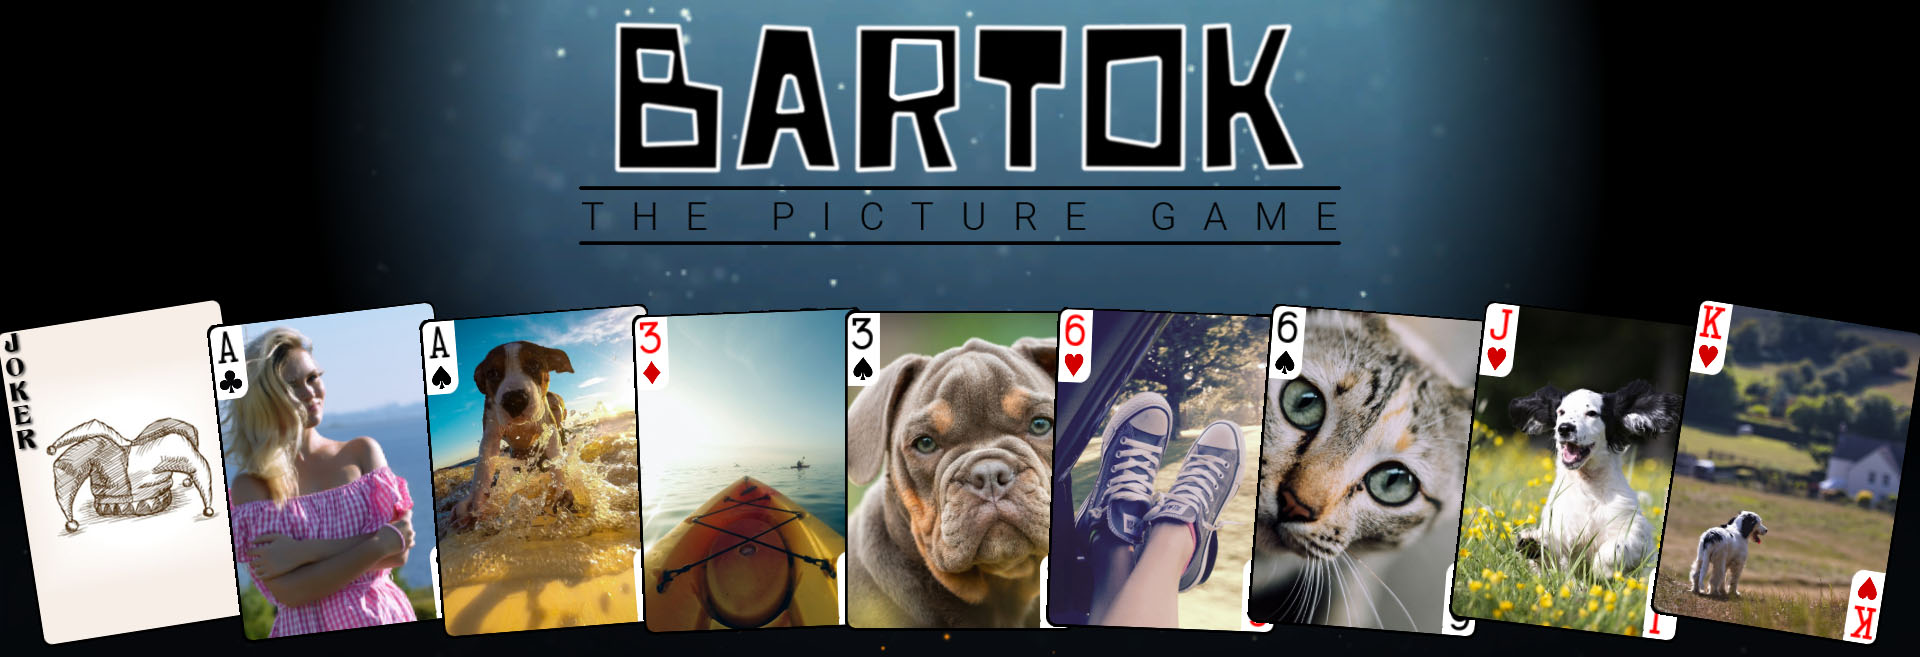 Bartok The Picture Game